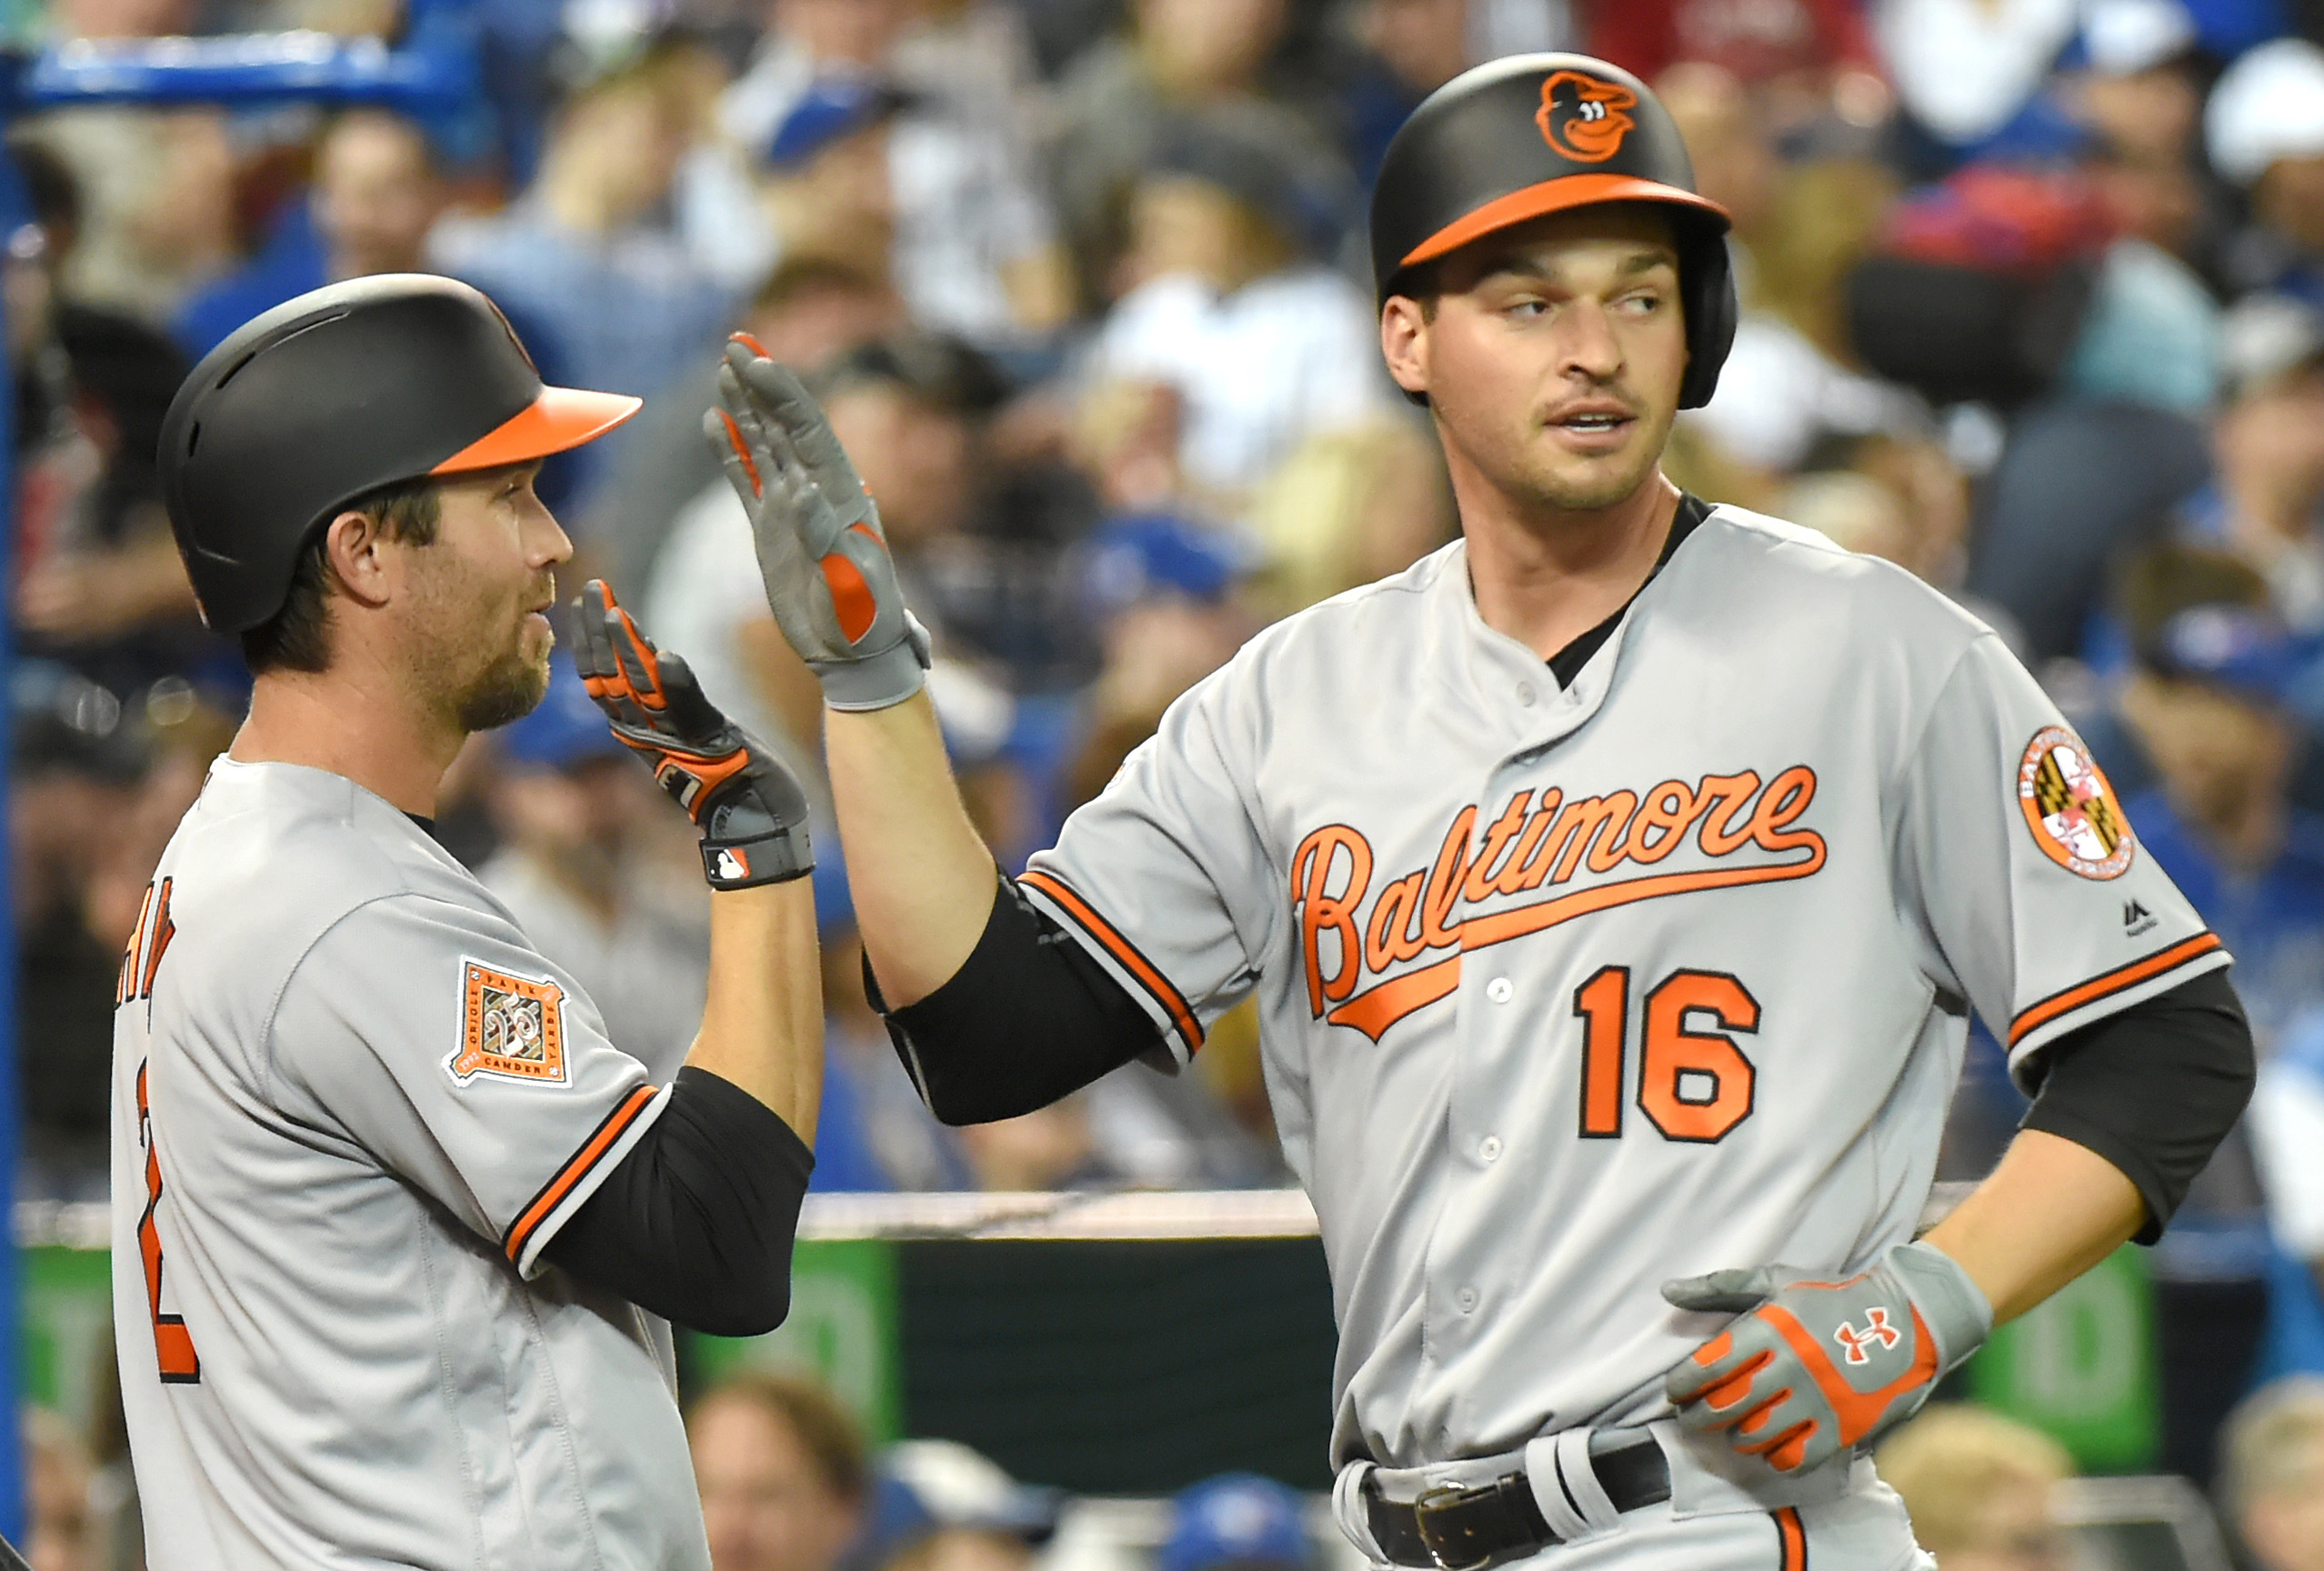 Mancini homers twice again, Orioles rout Blue Jays 11-4